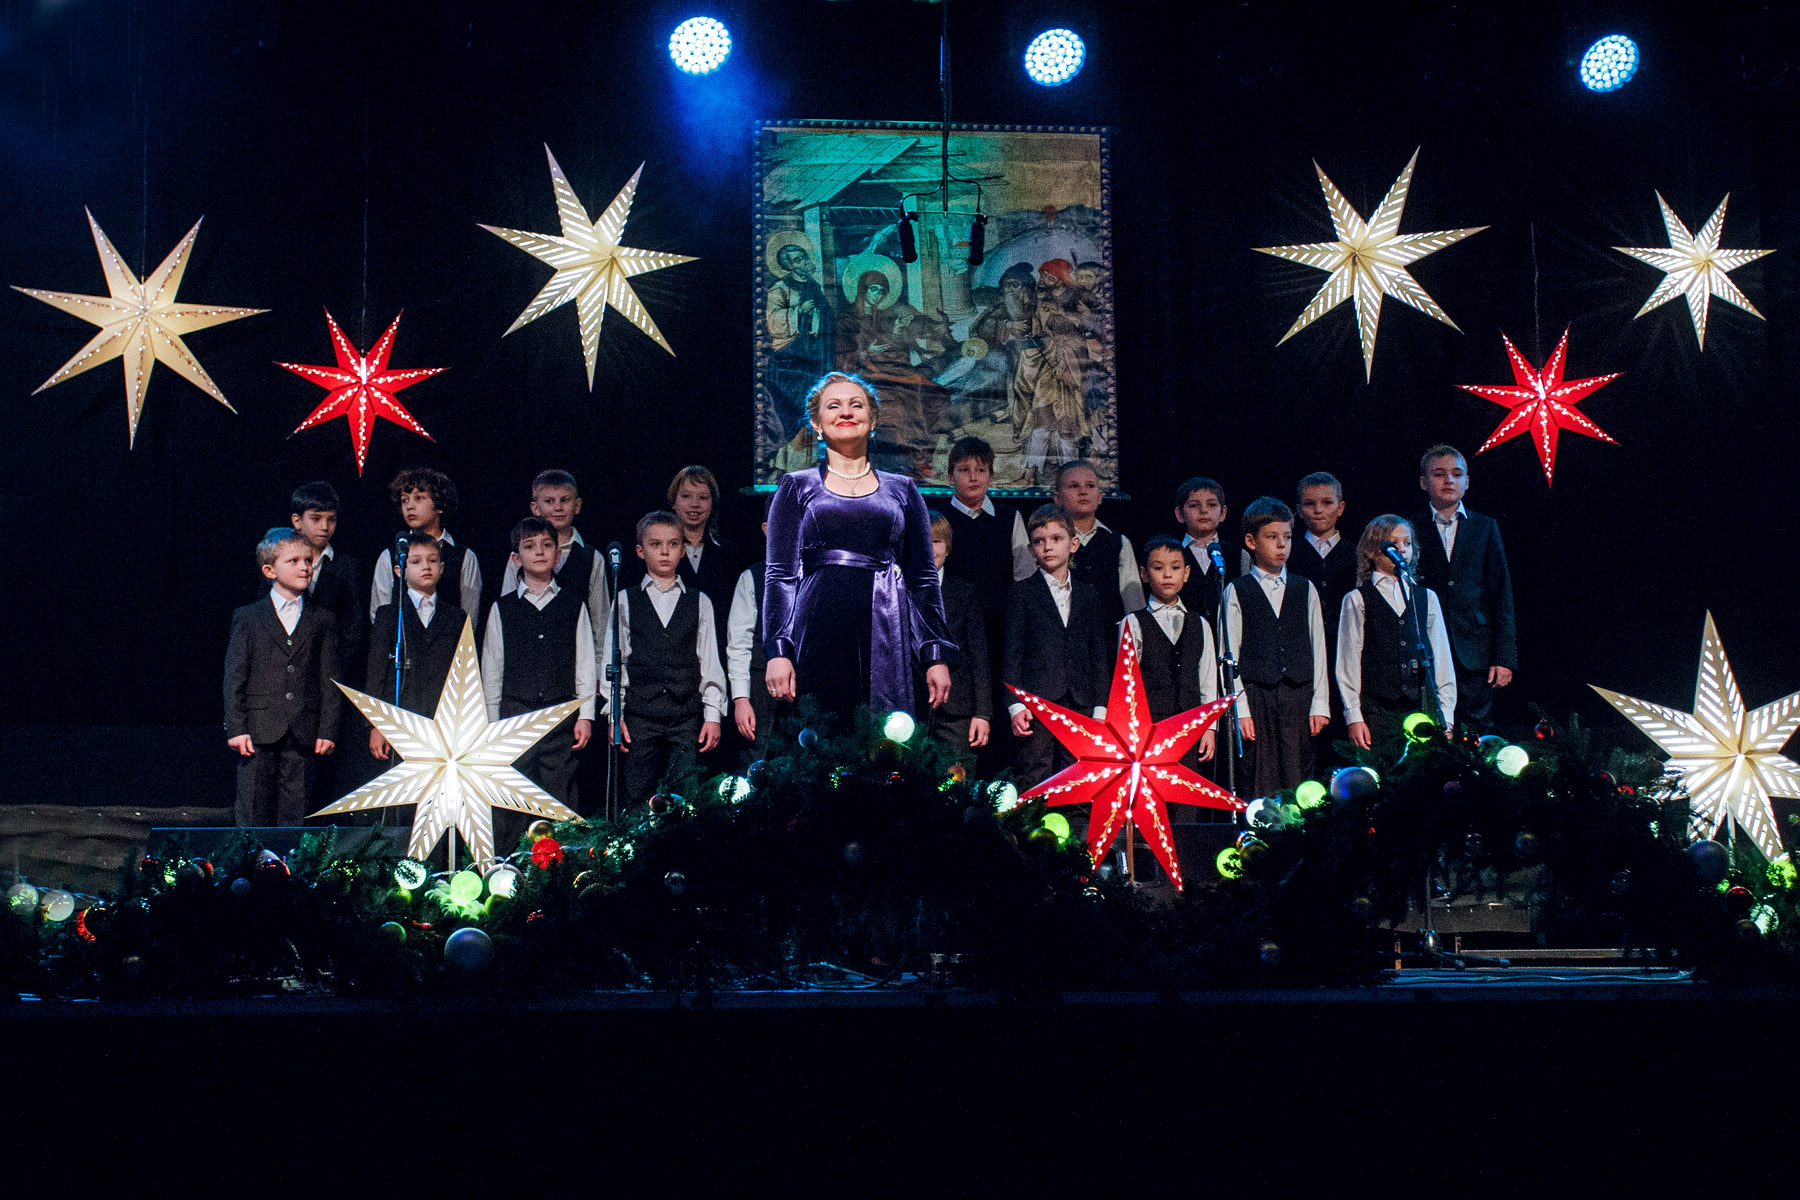 Boys' Choir at the State Academy of Music – Minsk